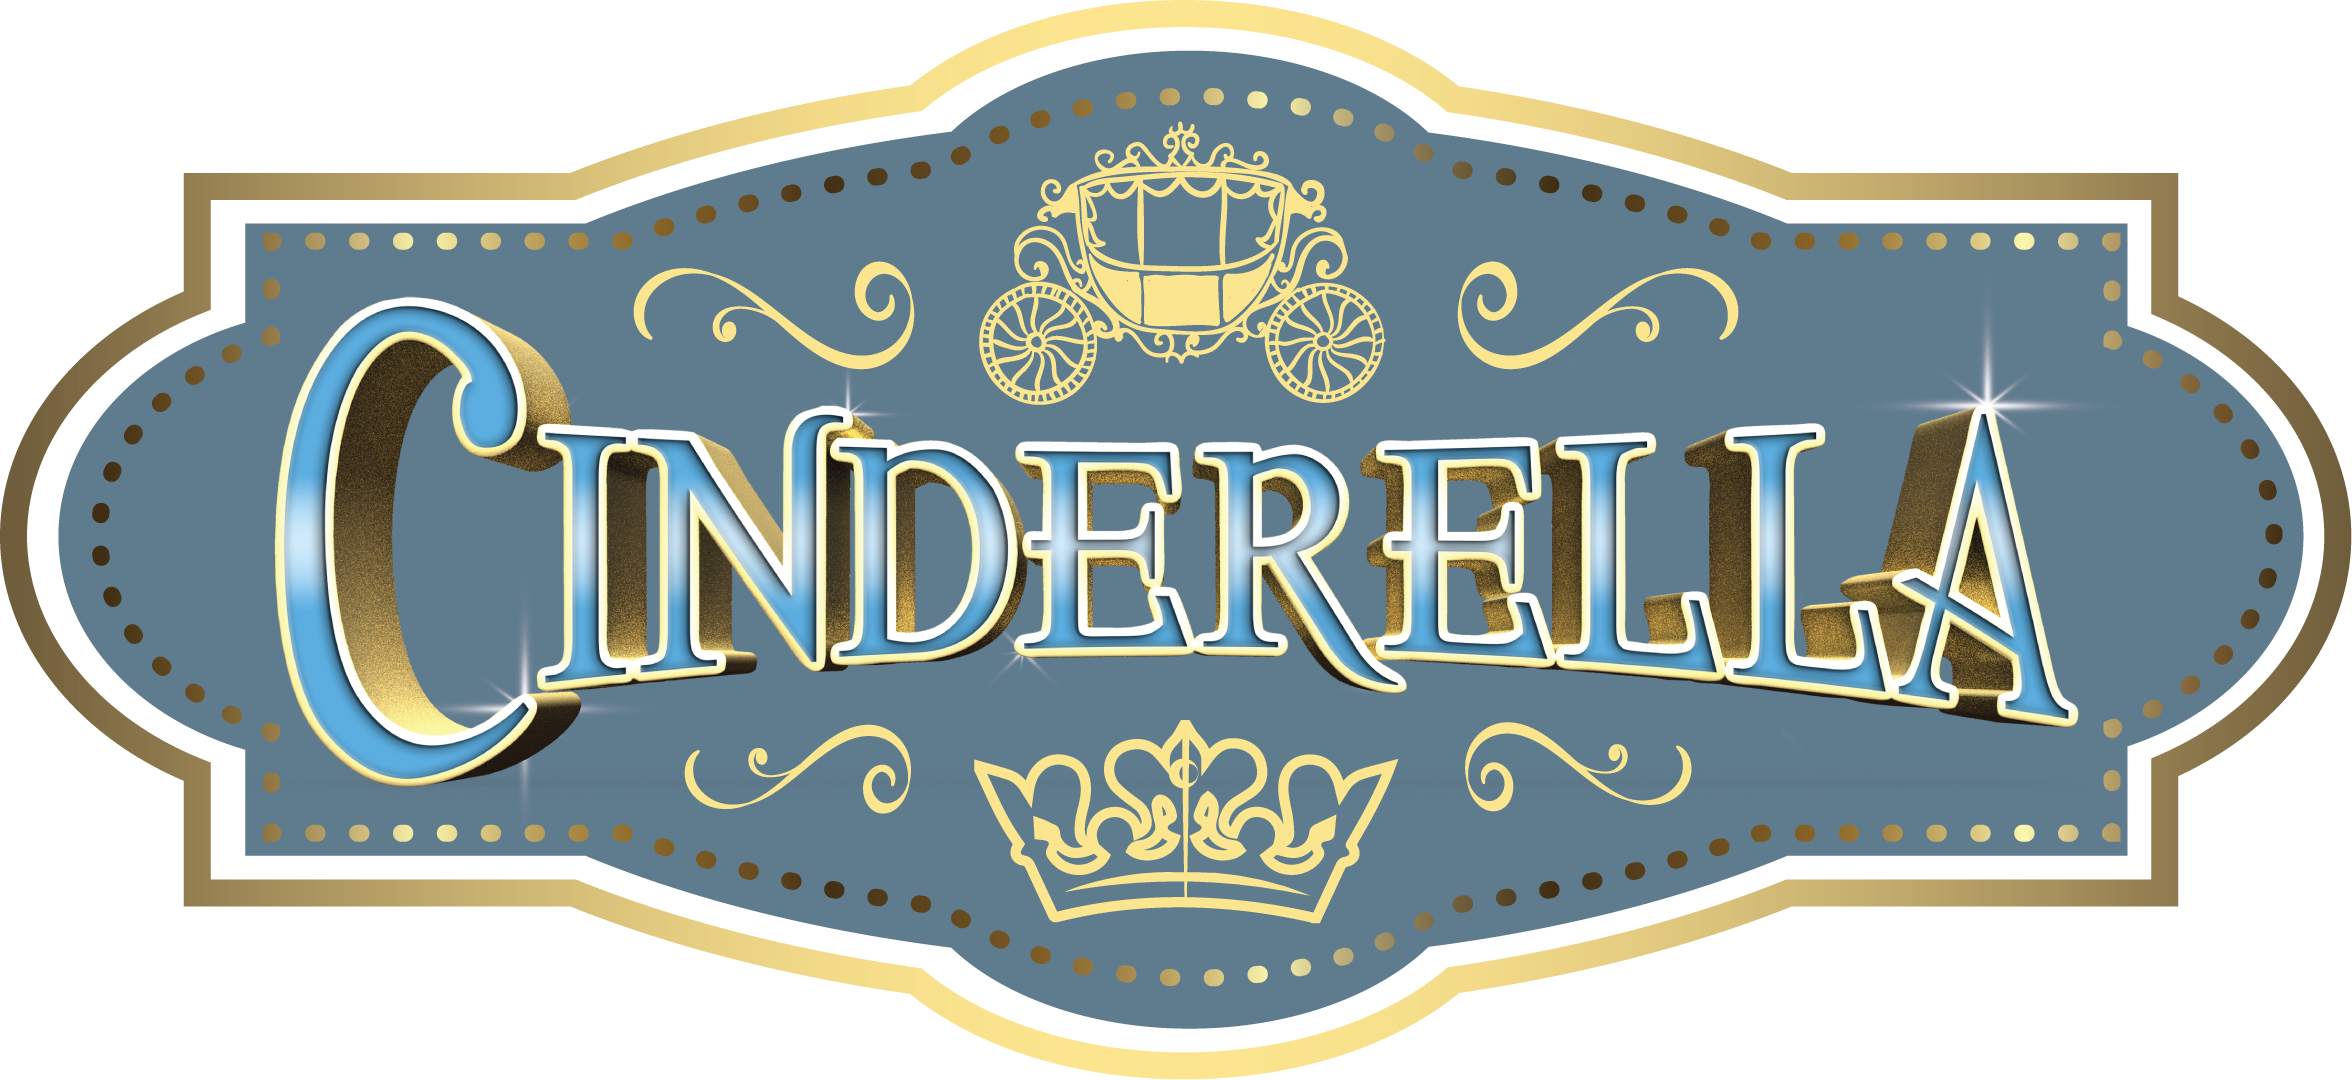 Download Cinderella Png Hd - Russo's New York Pizzeria Clipart (2352x1080), Png Download